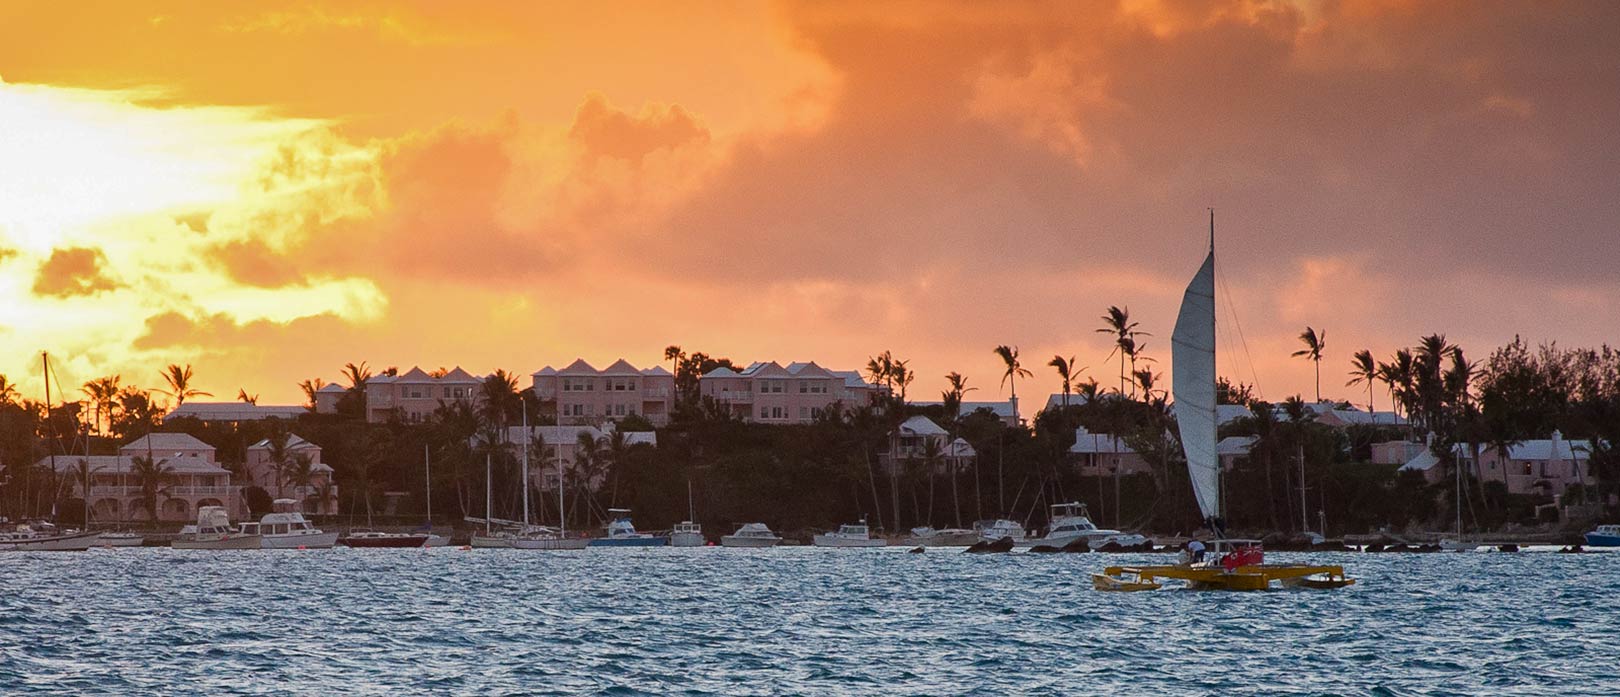 View of Bermuda from the sea at sunset